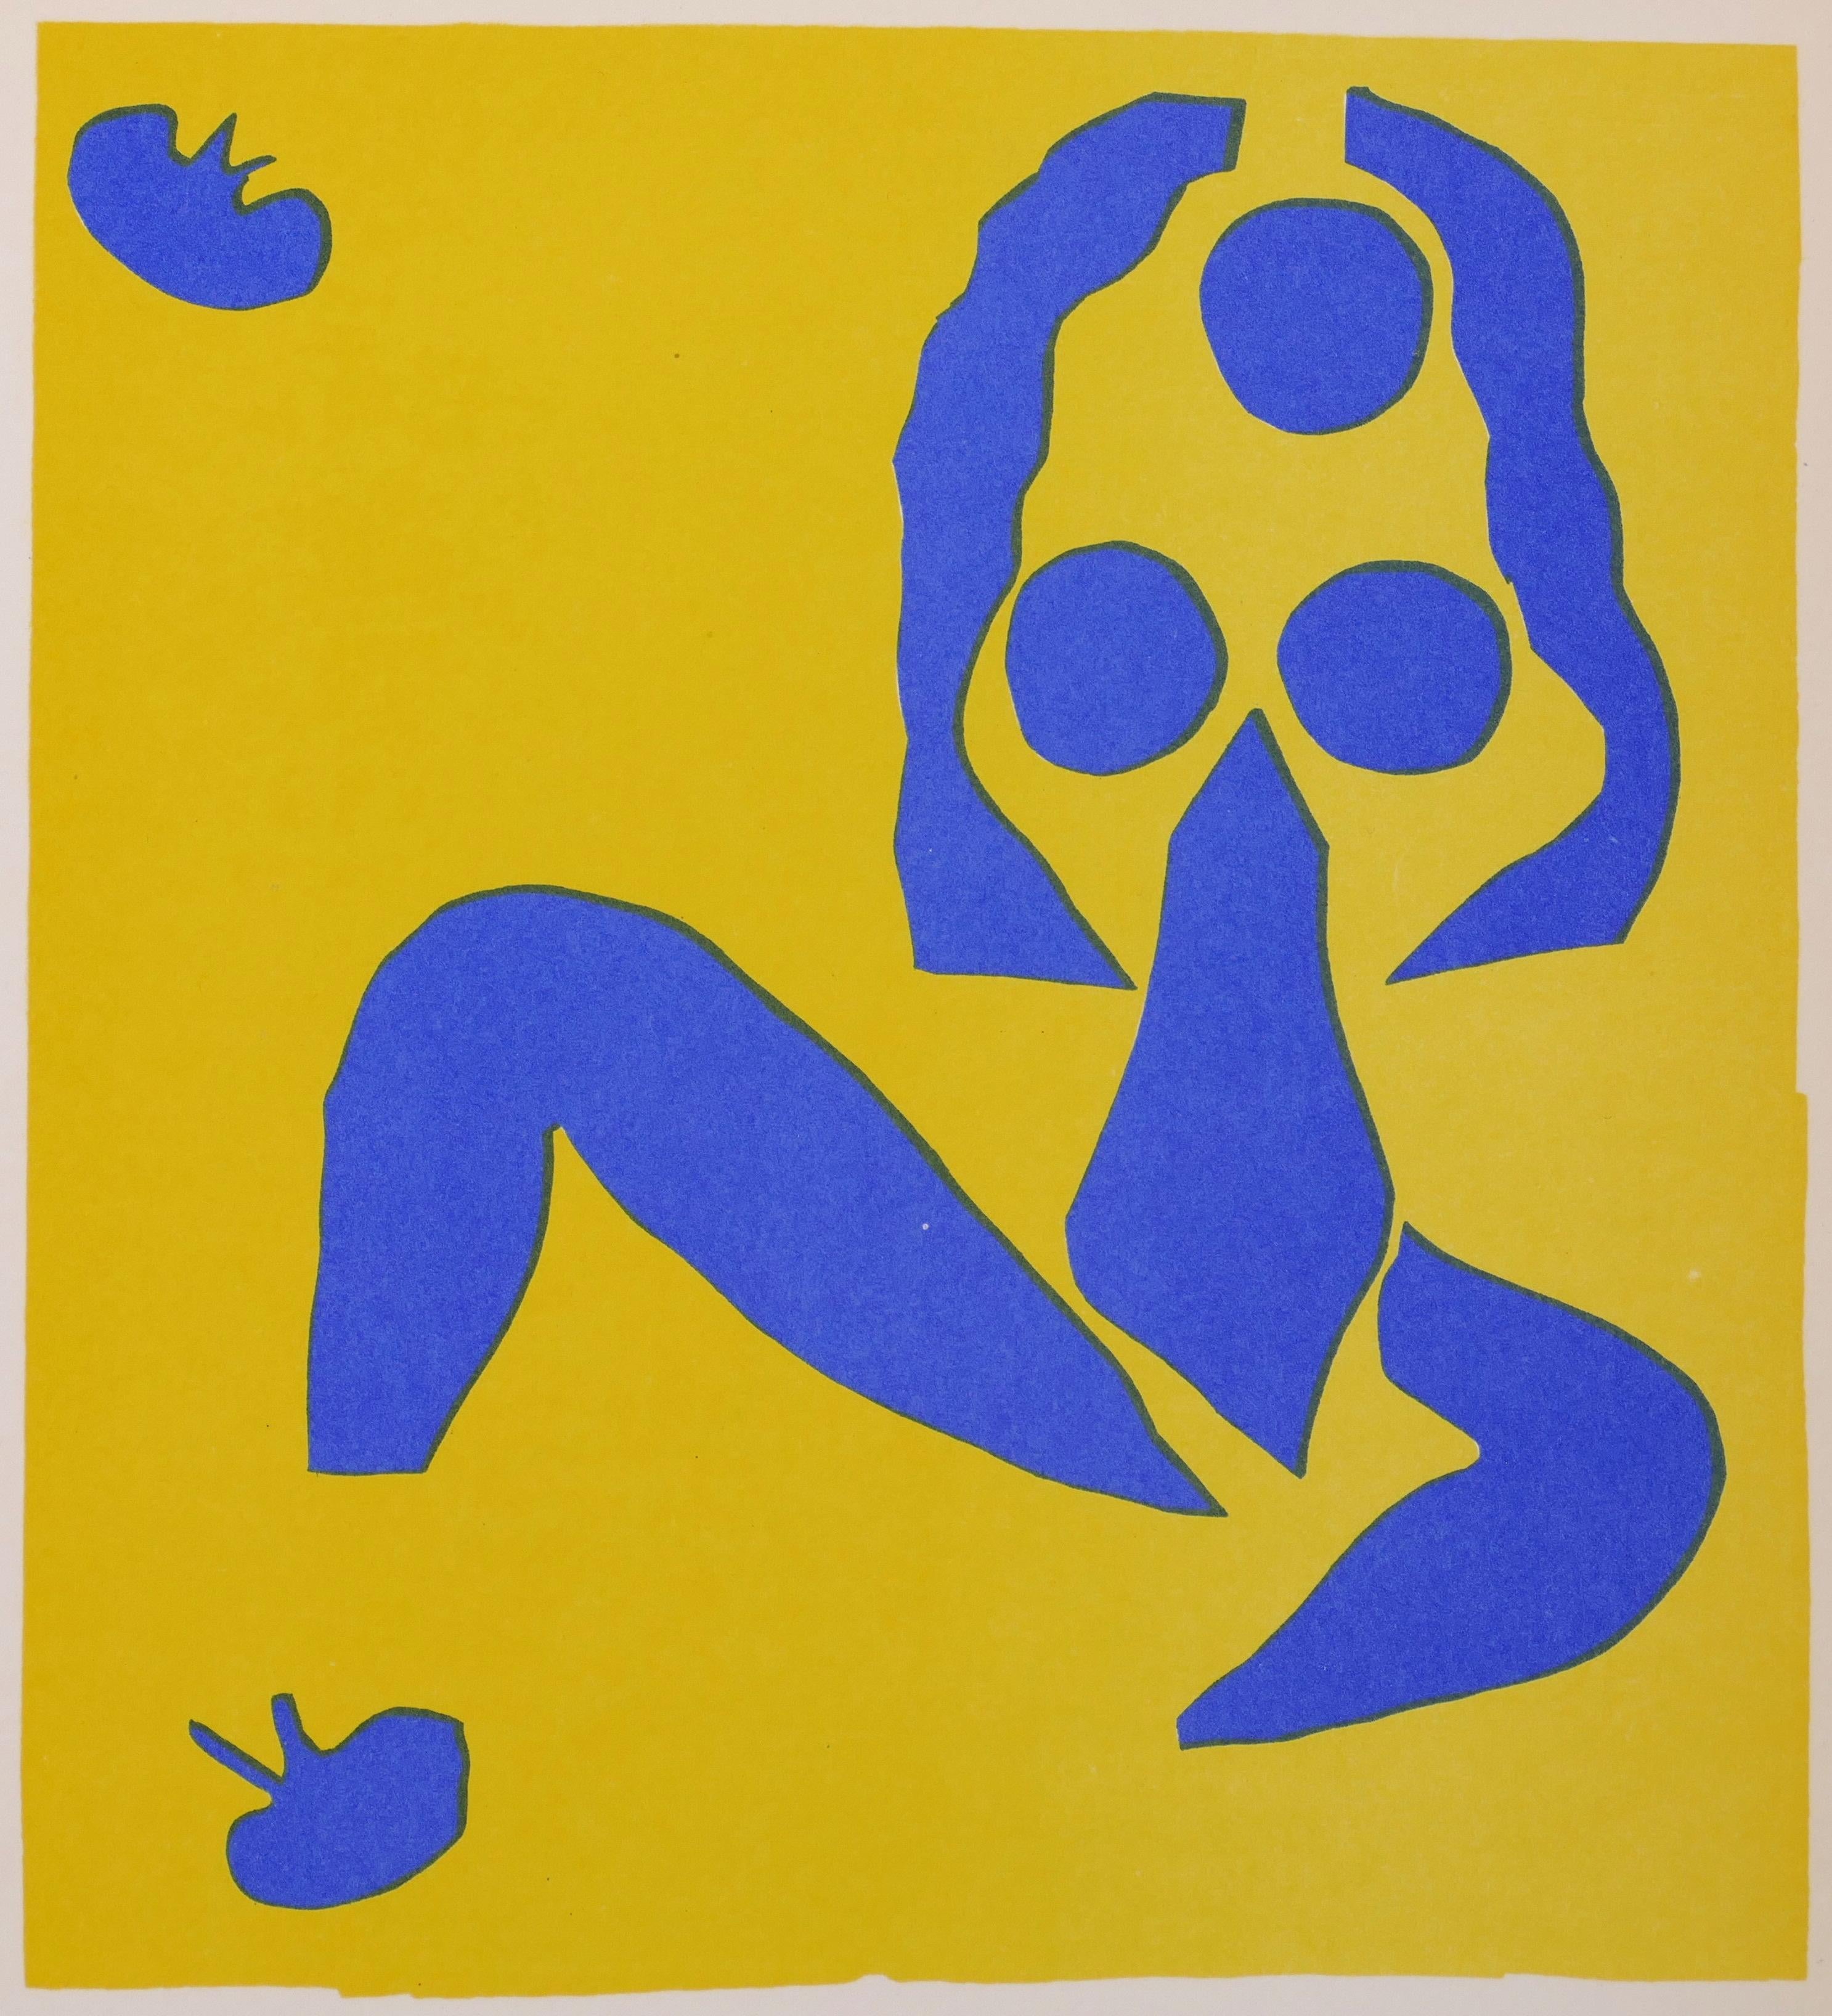 (after) Henri Matisse Print - Composition in Blue and Yellow - Original Lithograph After Henri Matisse - 1960s